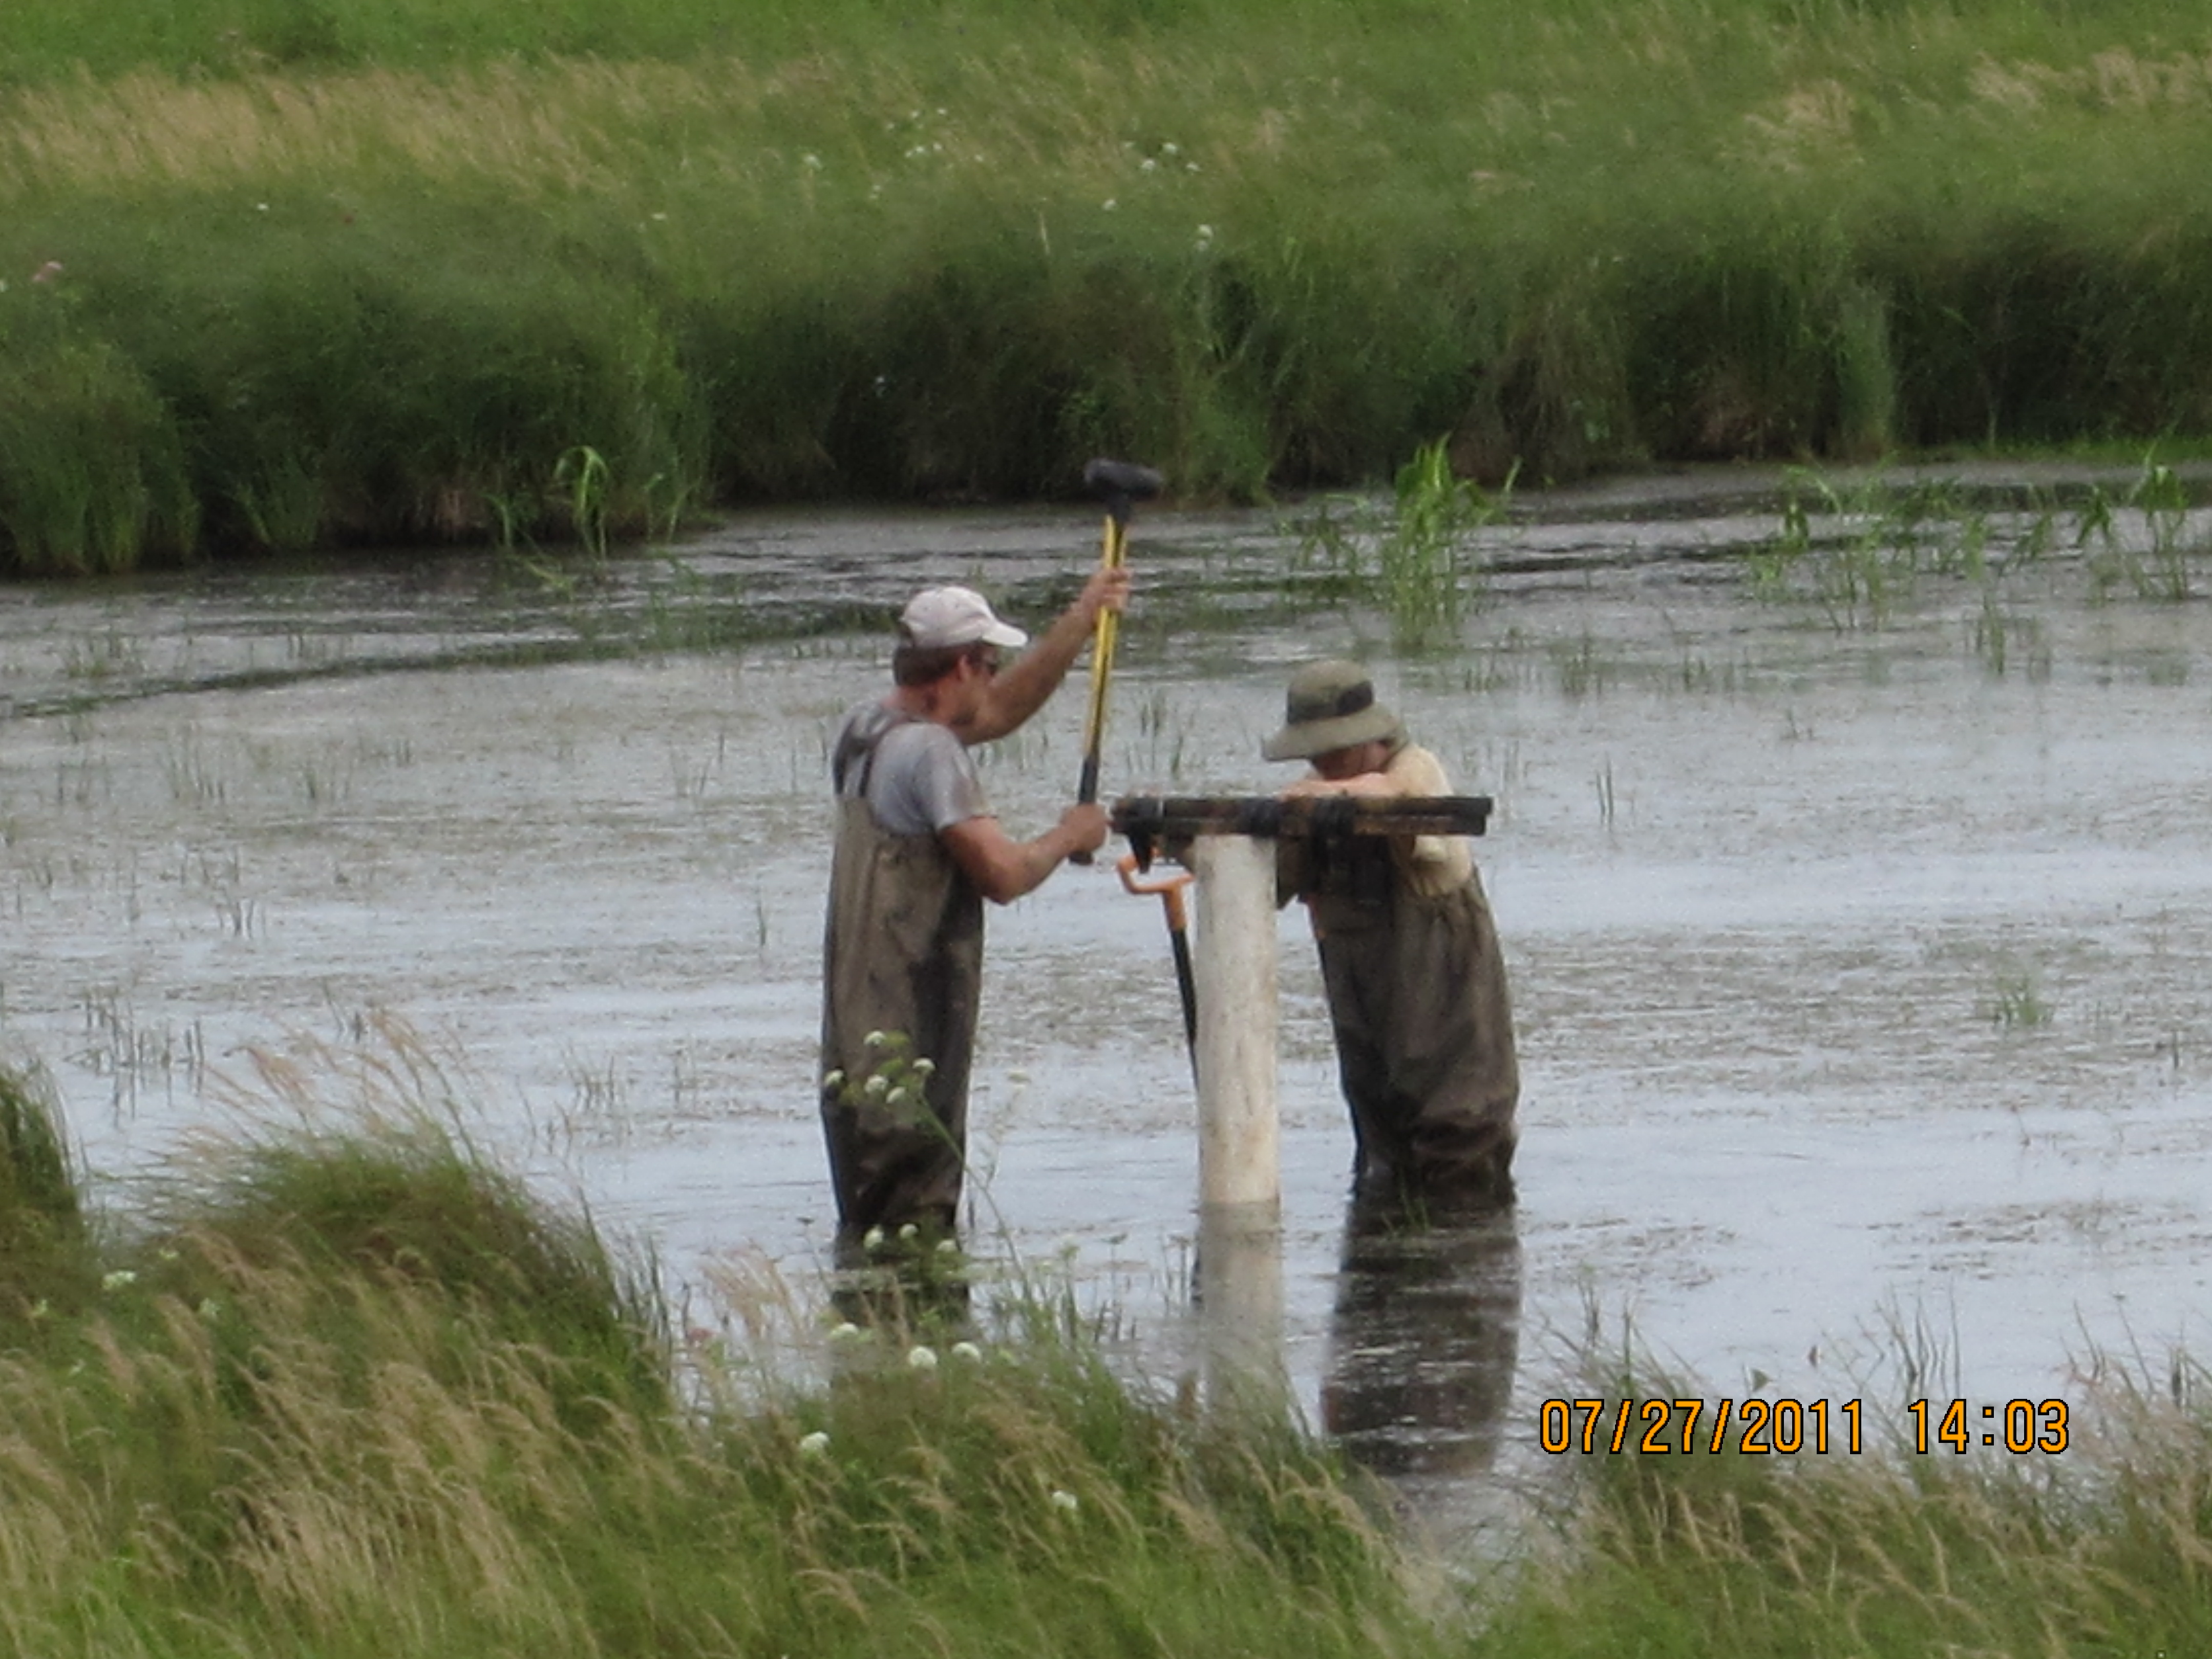 Aaron and Dan extract a sediment core from a wetland in Iowa.